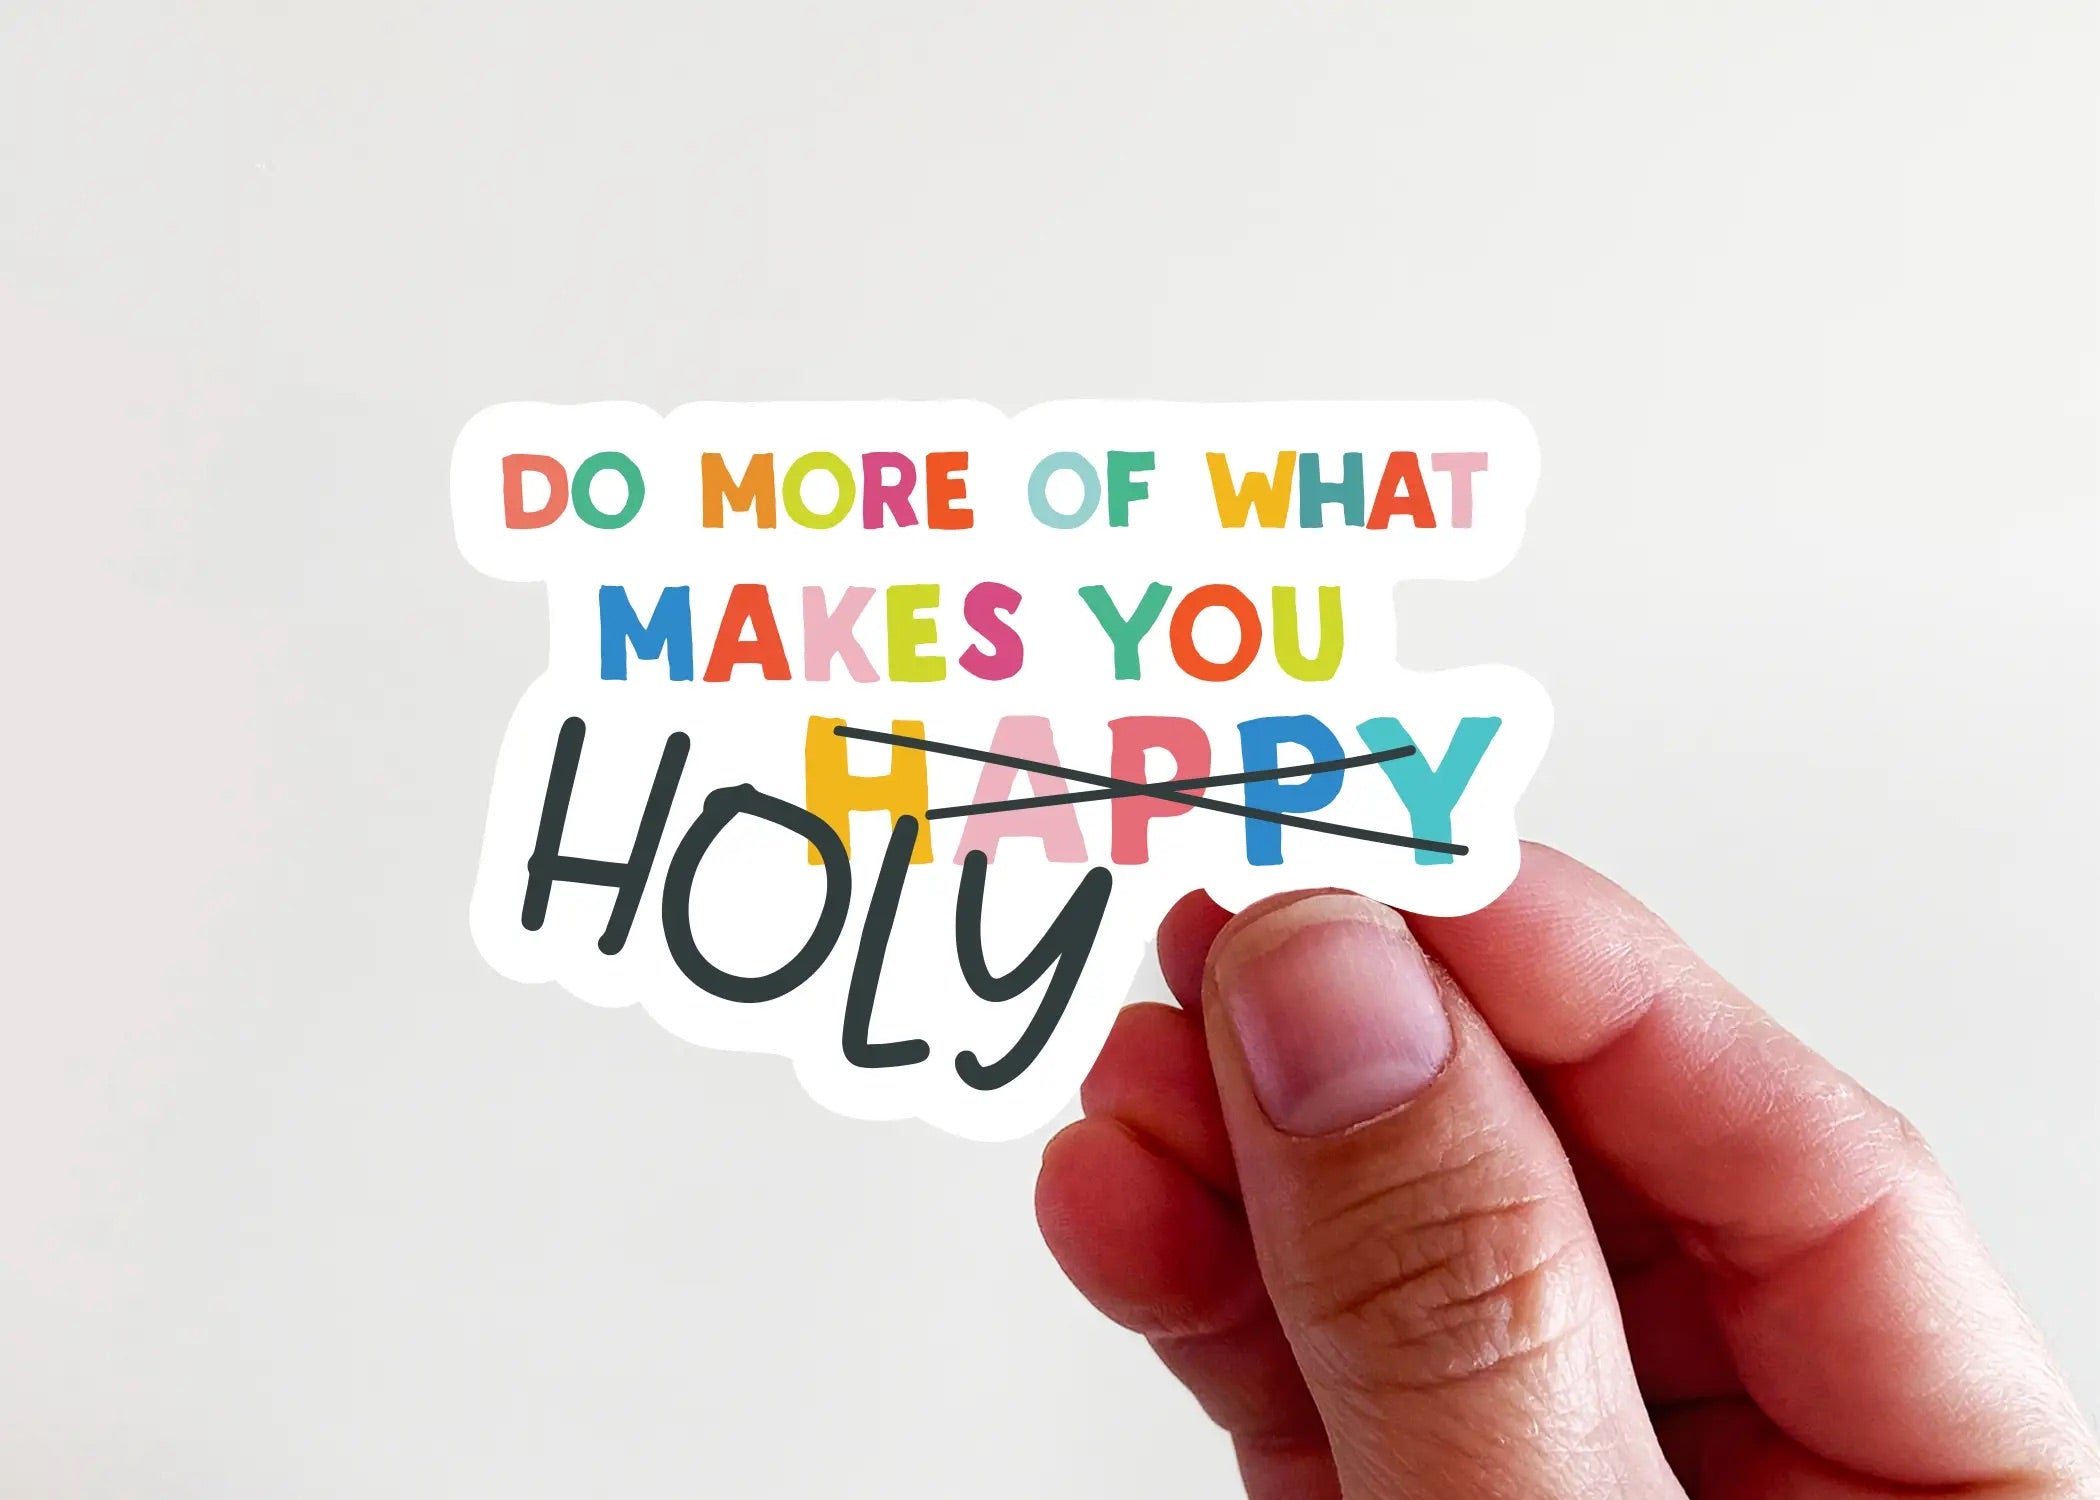 Do More of What Makes You Holy